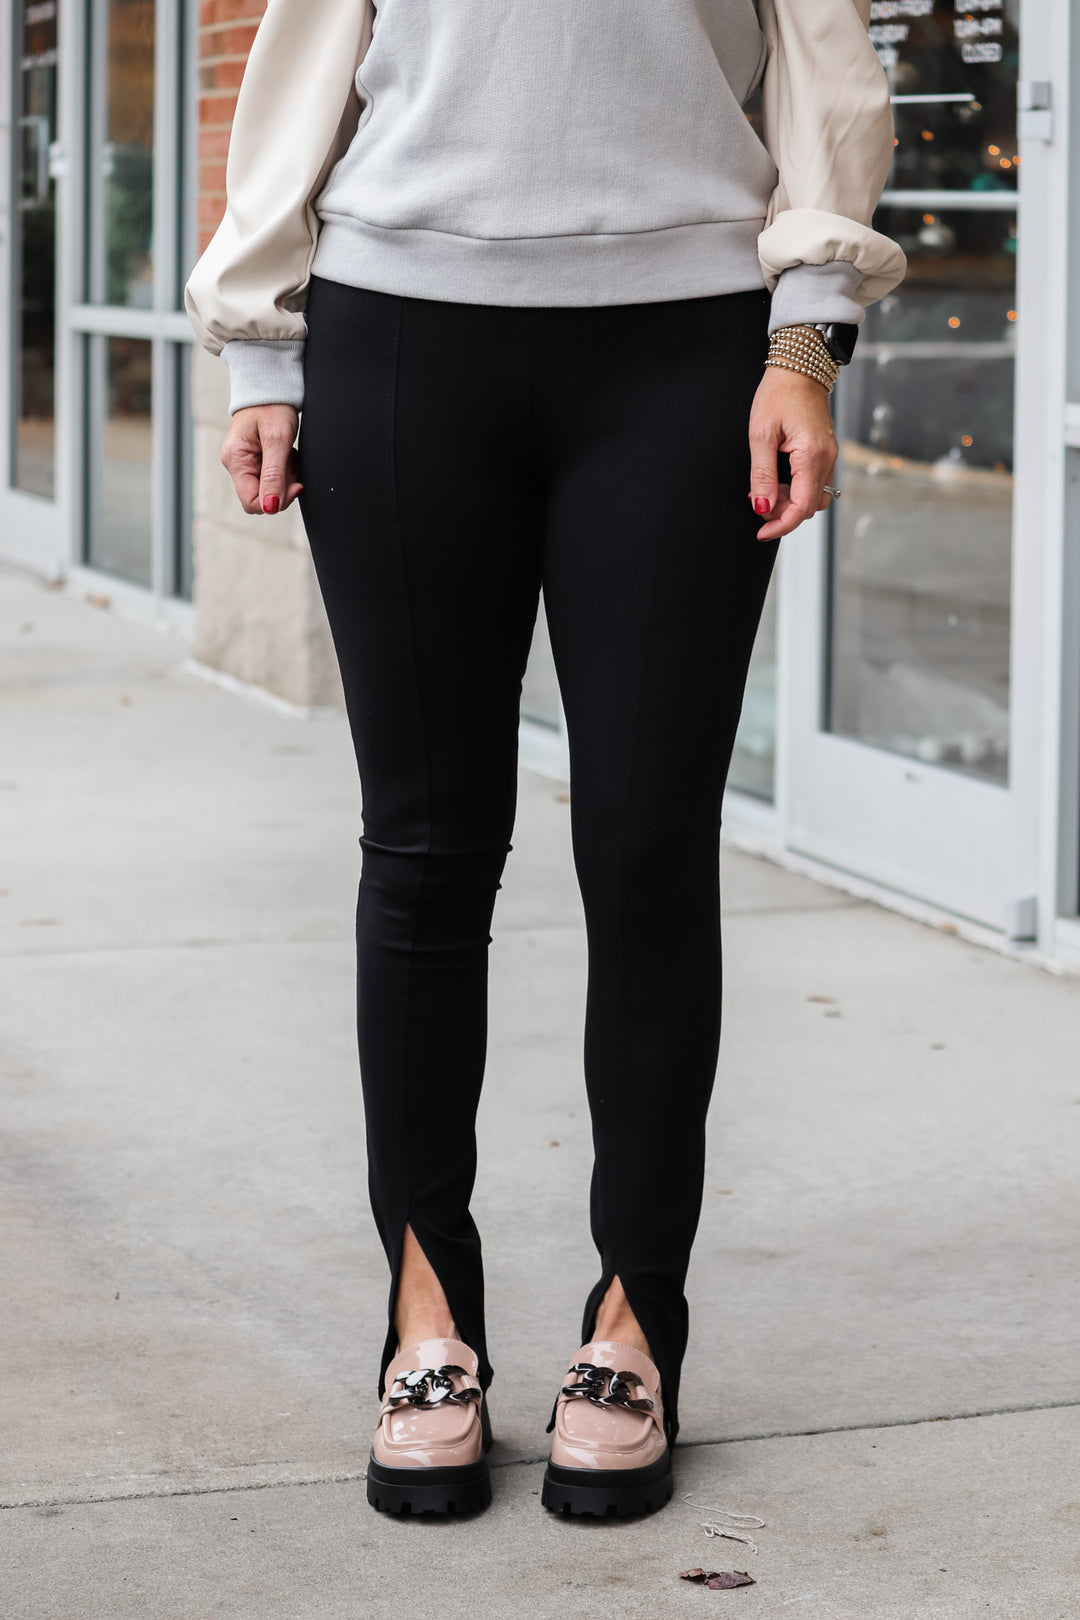 A woman standing in front of a shop wearing black front slit hem leggings and a neutral top.